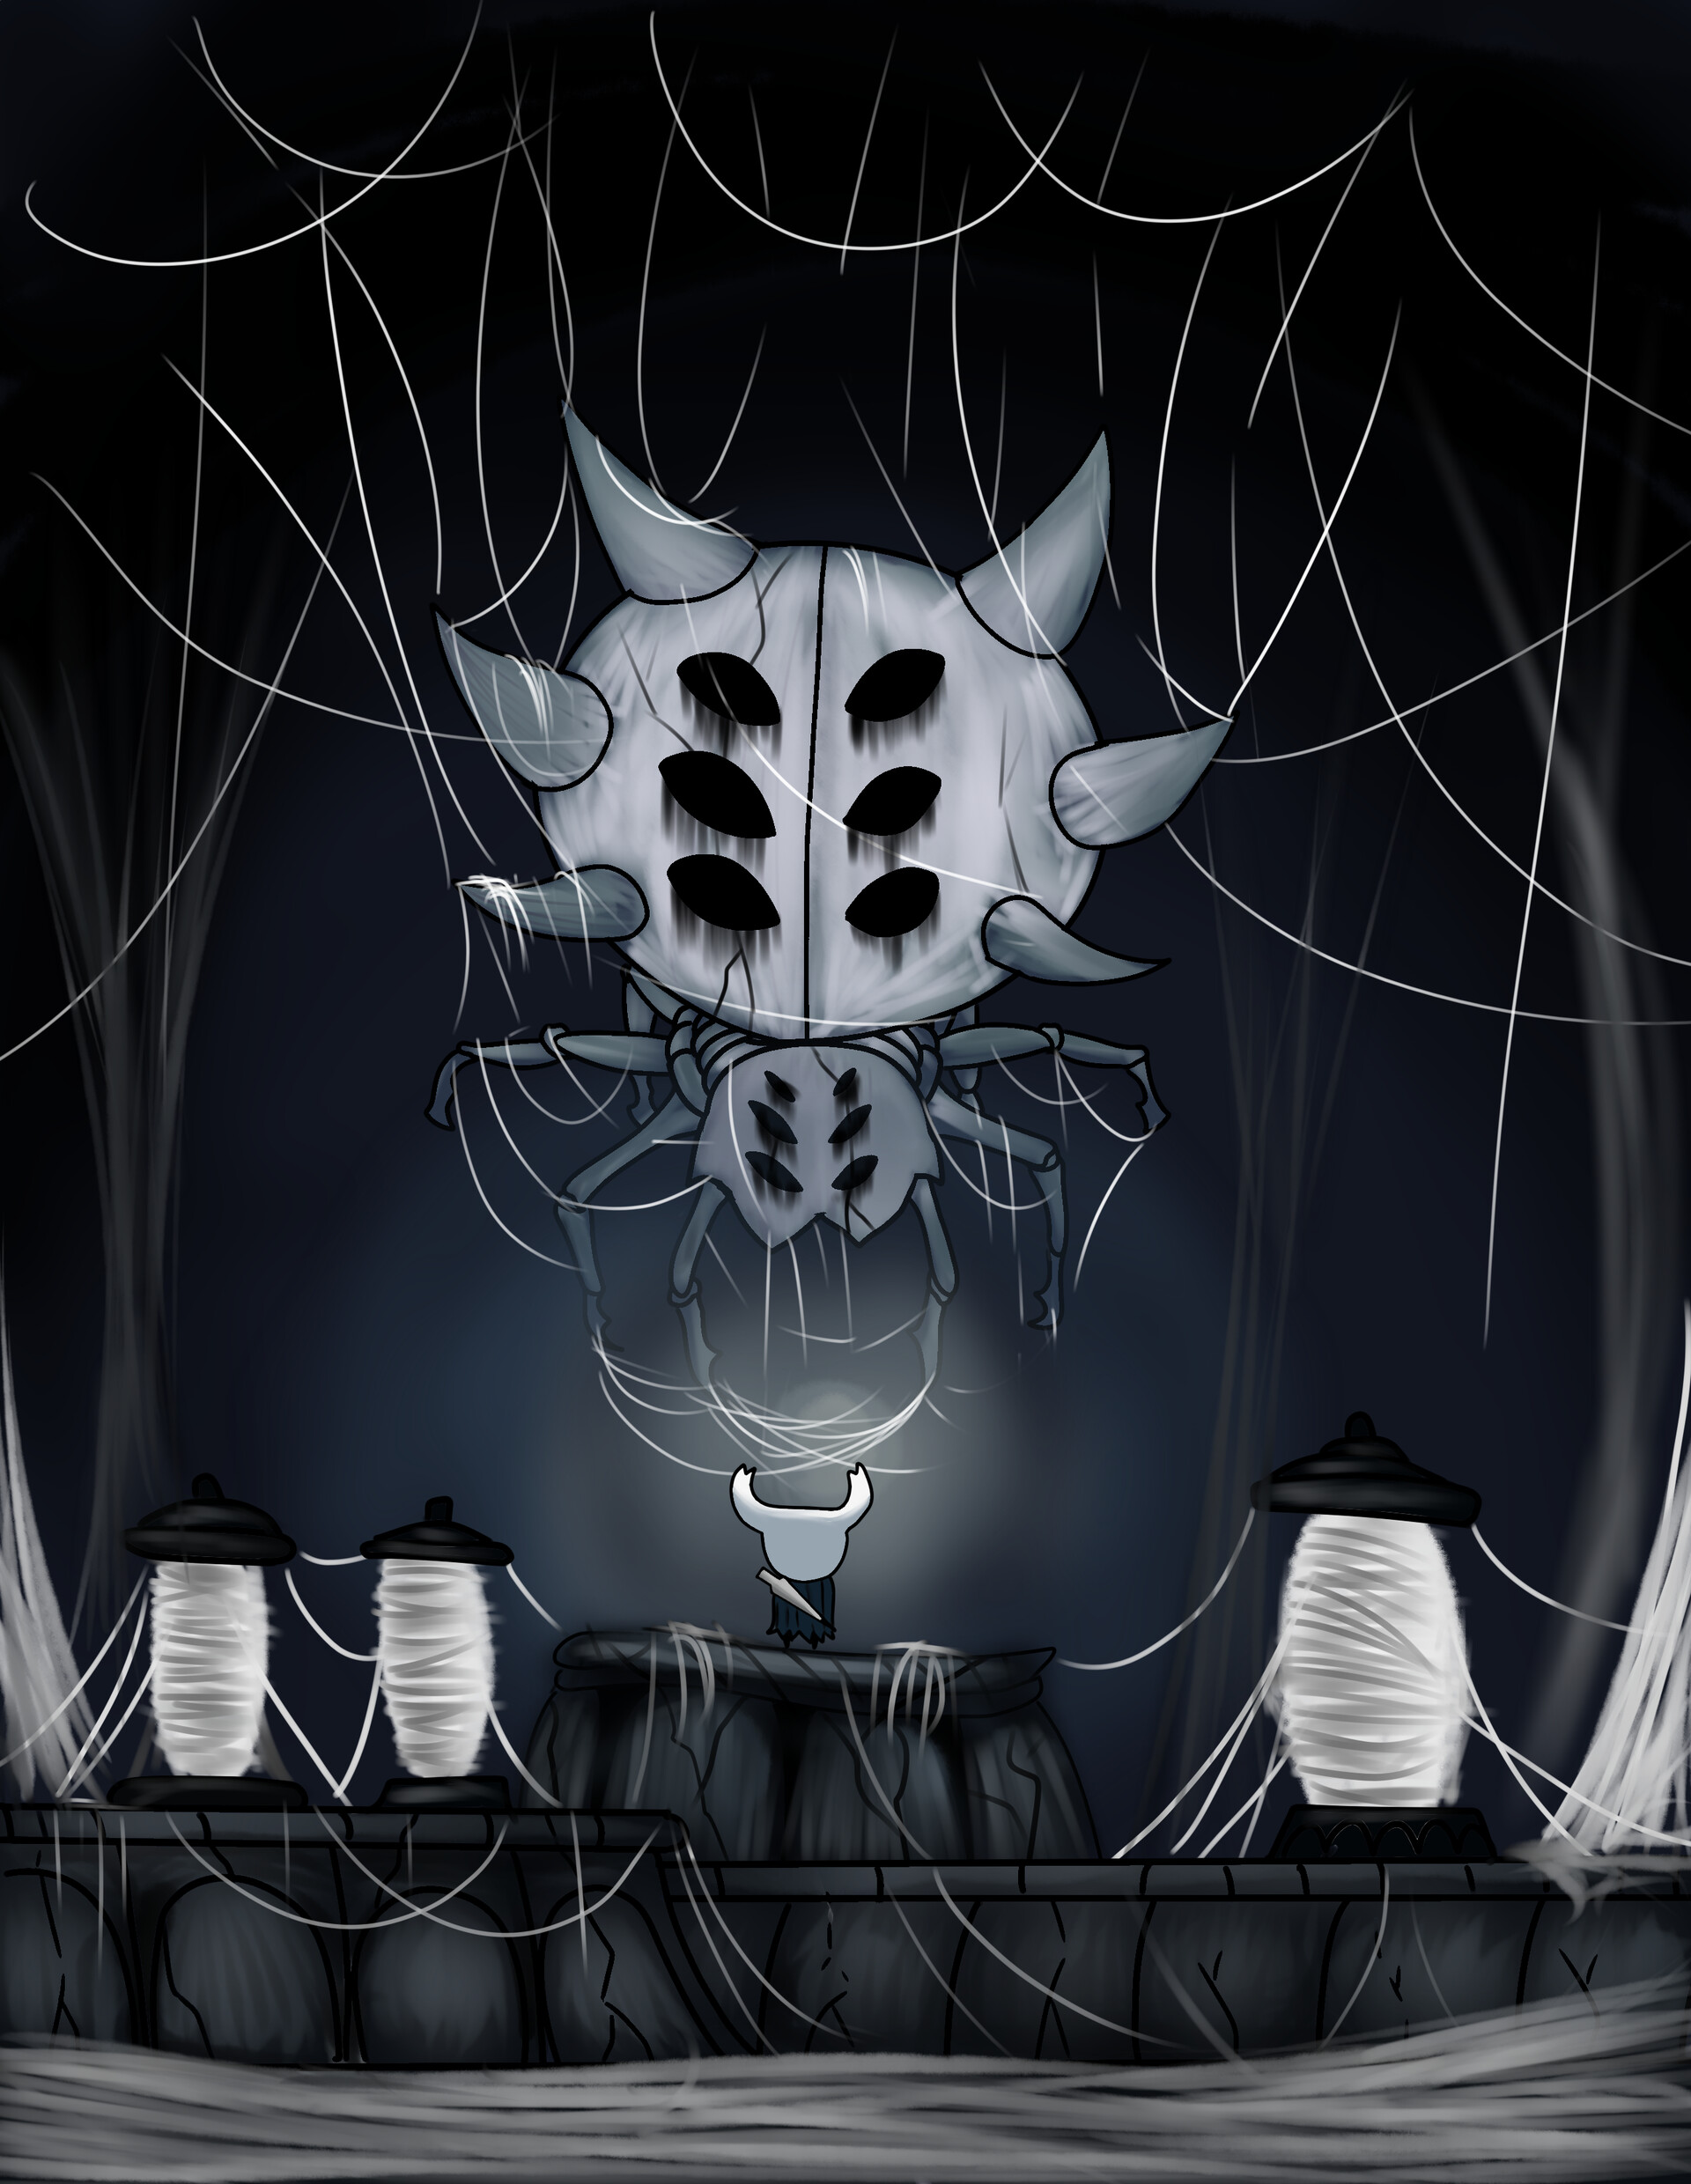 ArtStation - From Software Bosses as Hollow Knight characters